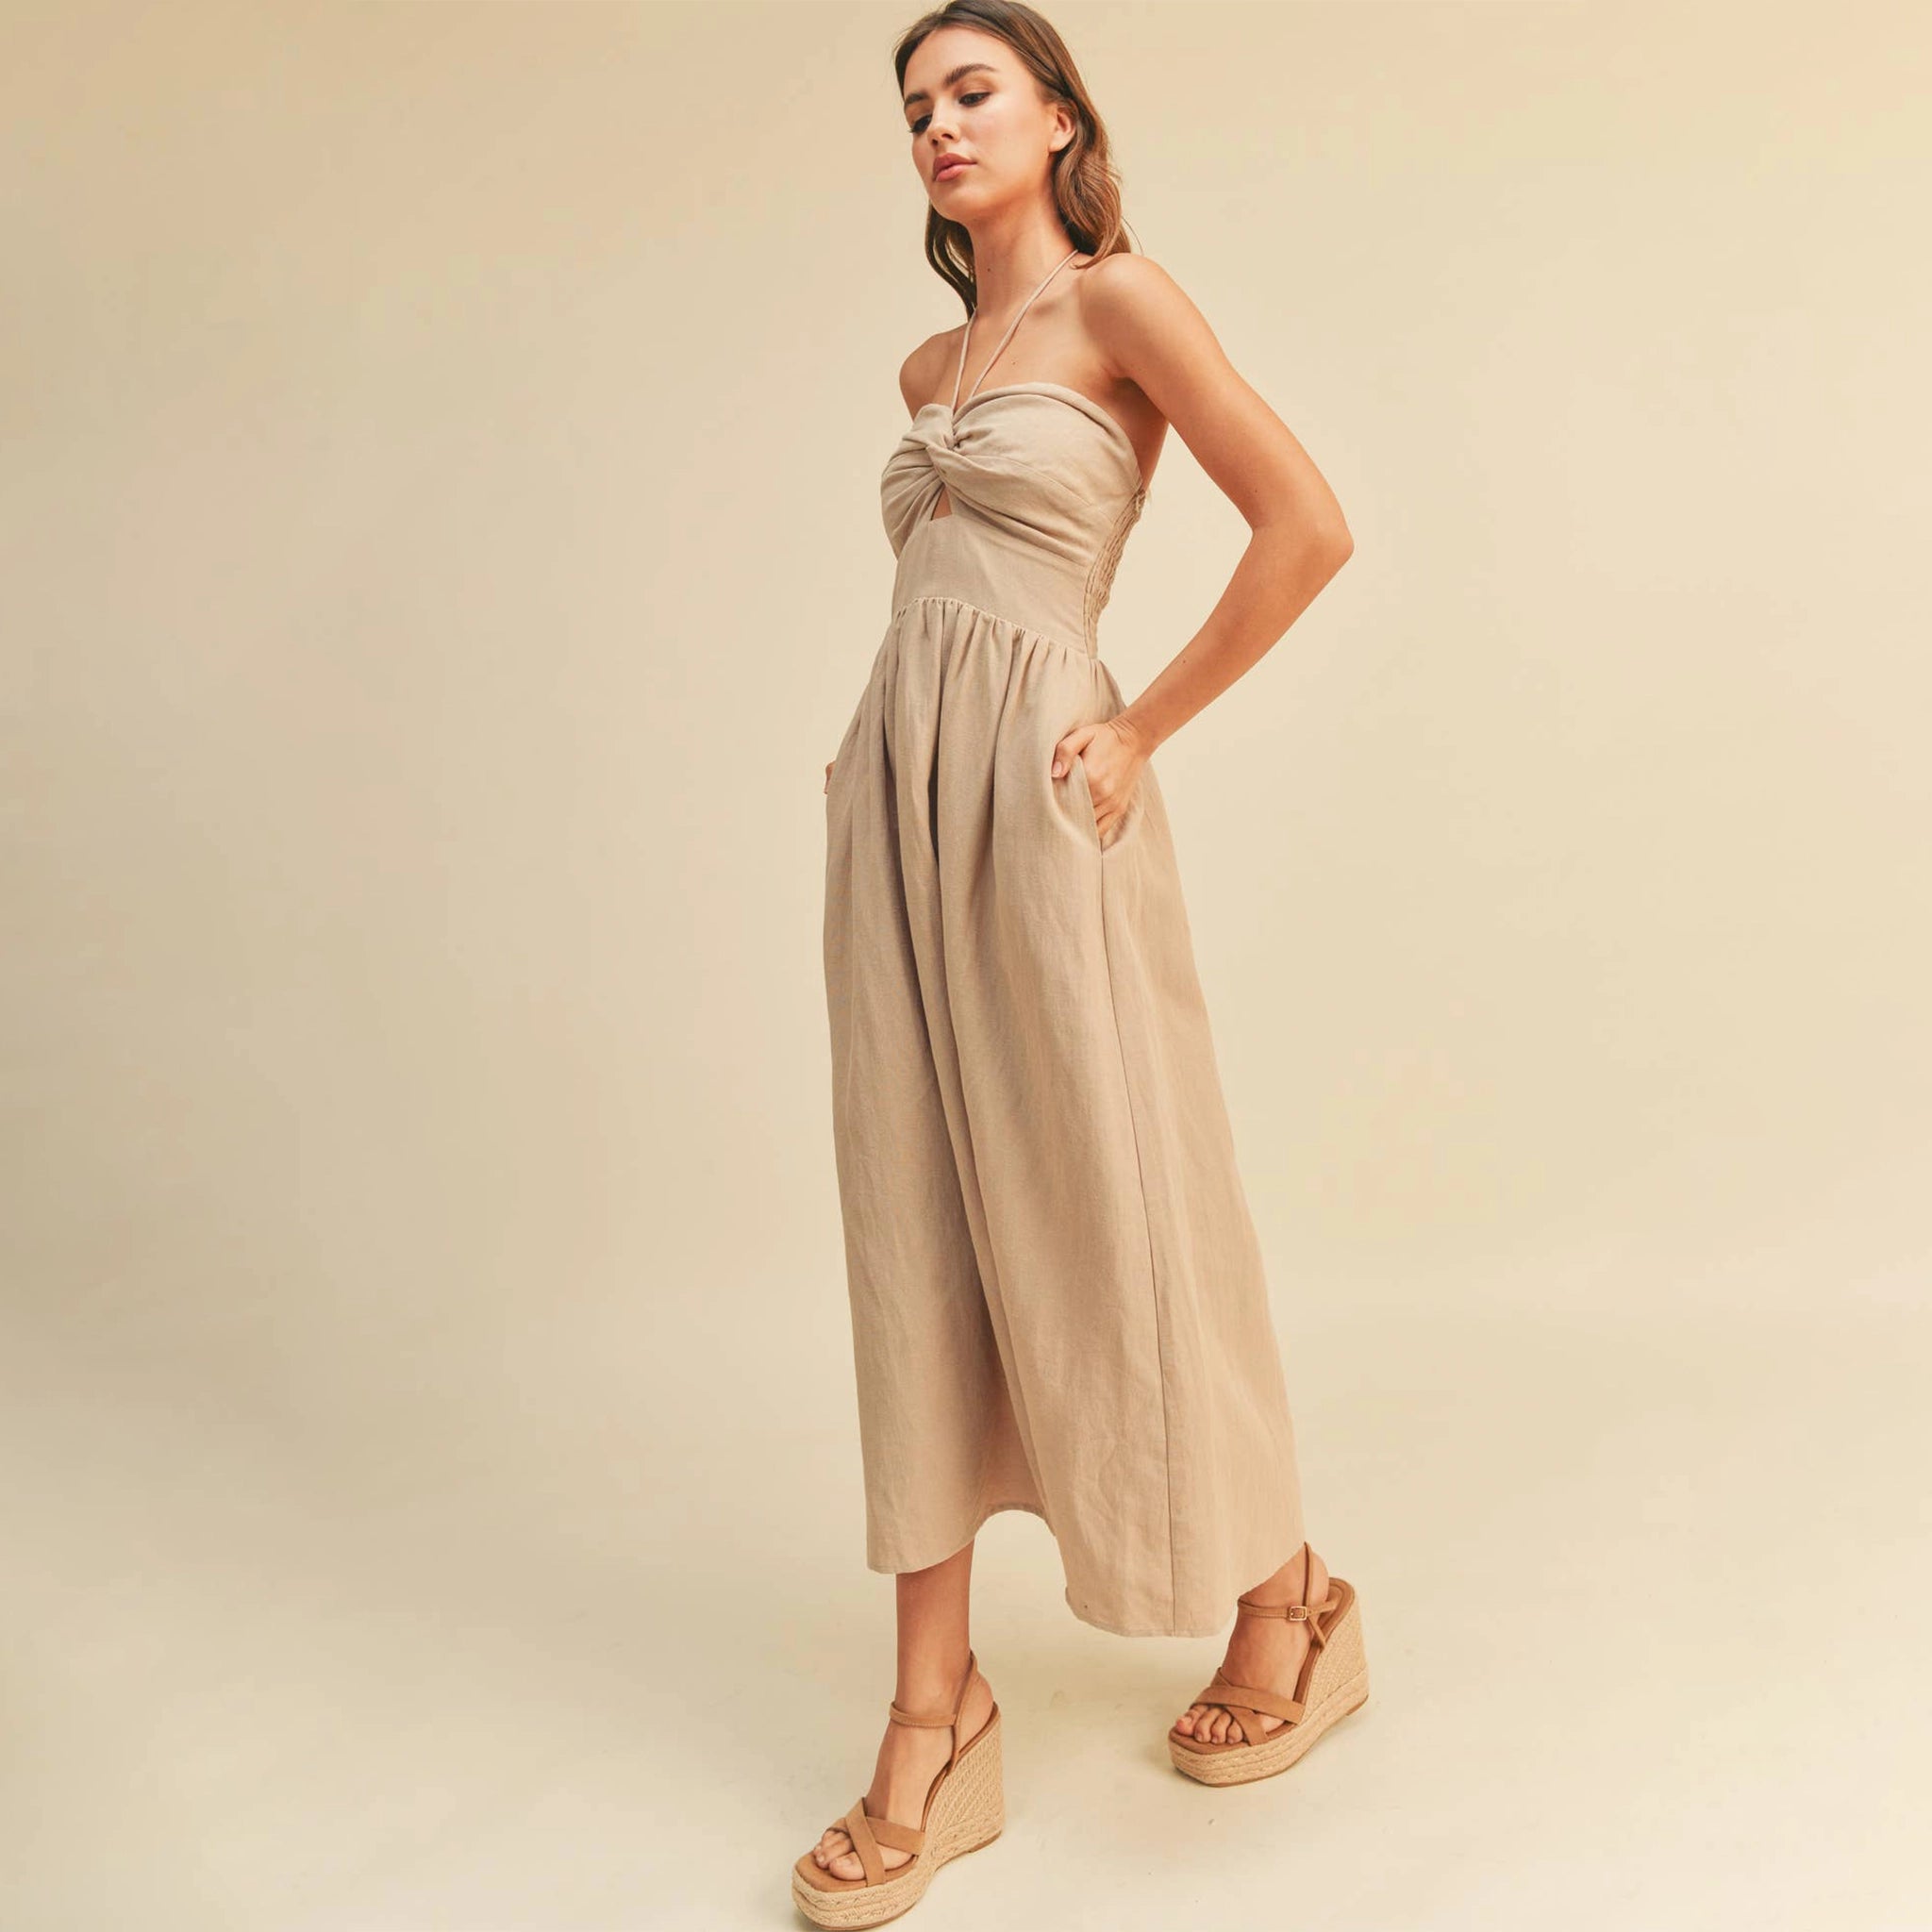 On a tan background is a model wearing the neutral Knotted Front Halter Neck Dress in the shade stone.